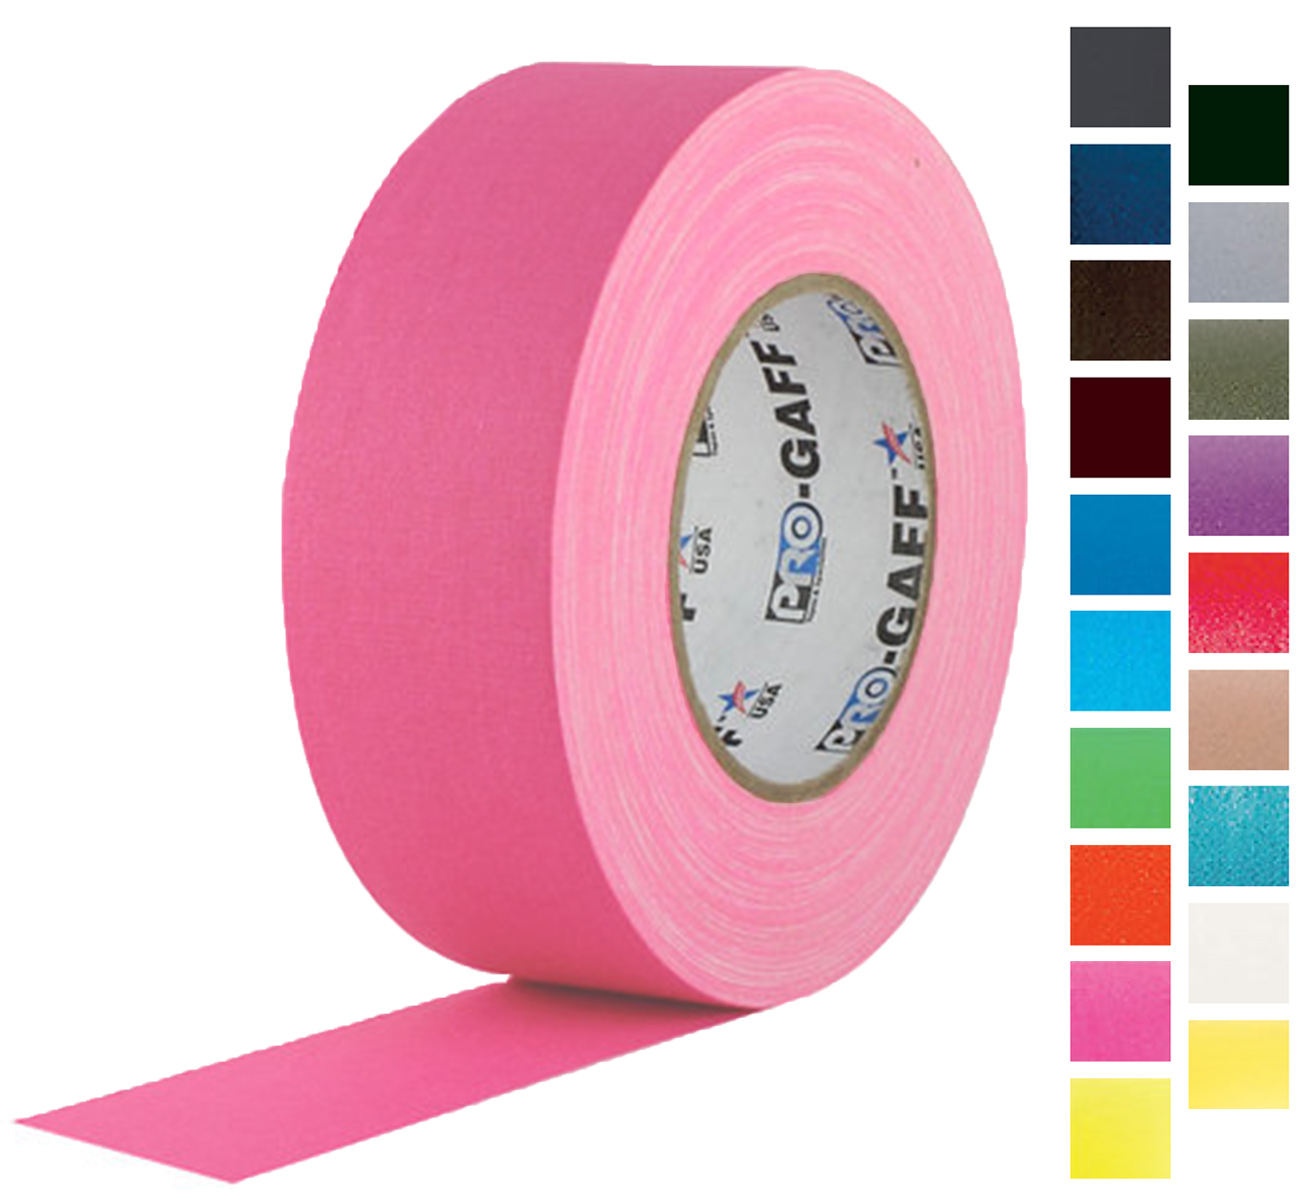 Rose Brand Gaffers Tape 55yd Roll Of 2 Wide Gaffers Tape